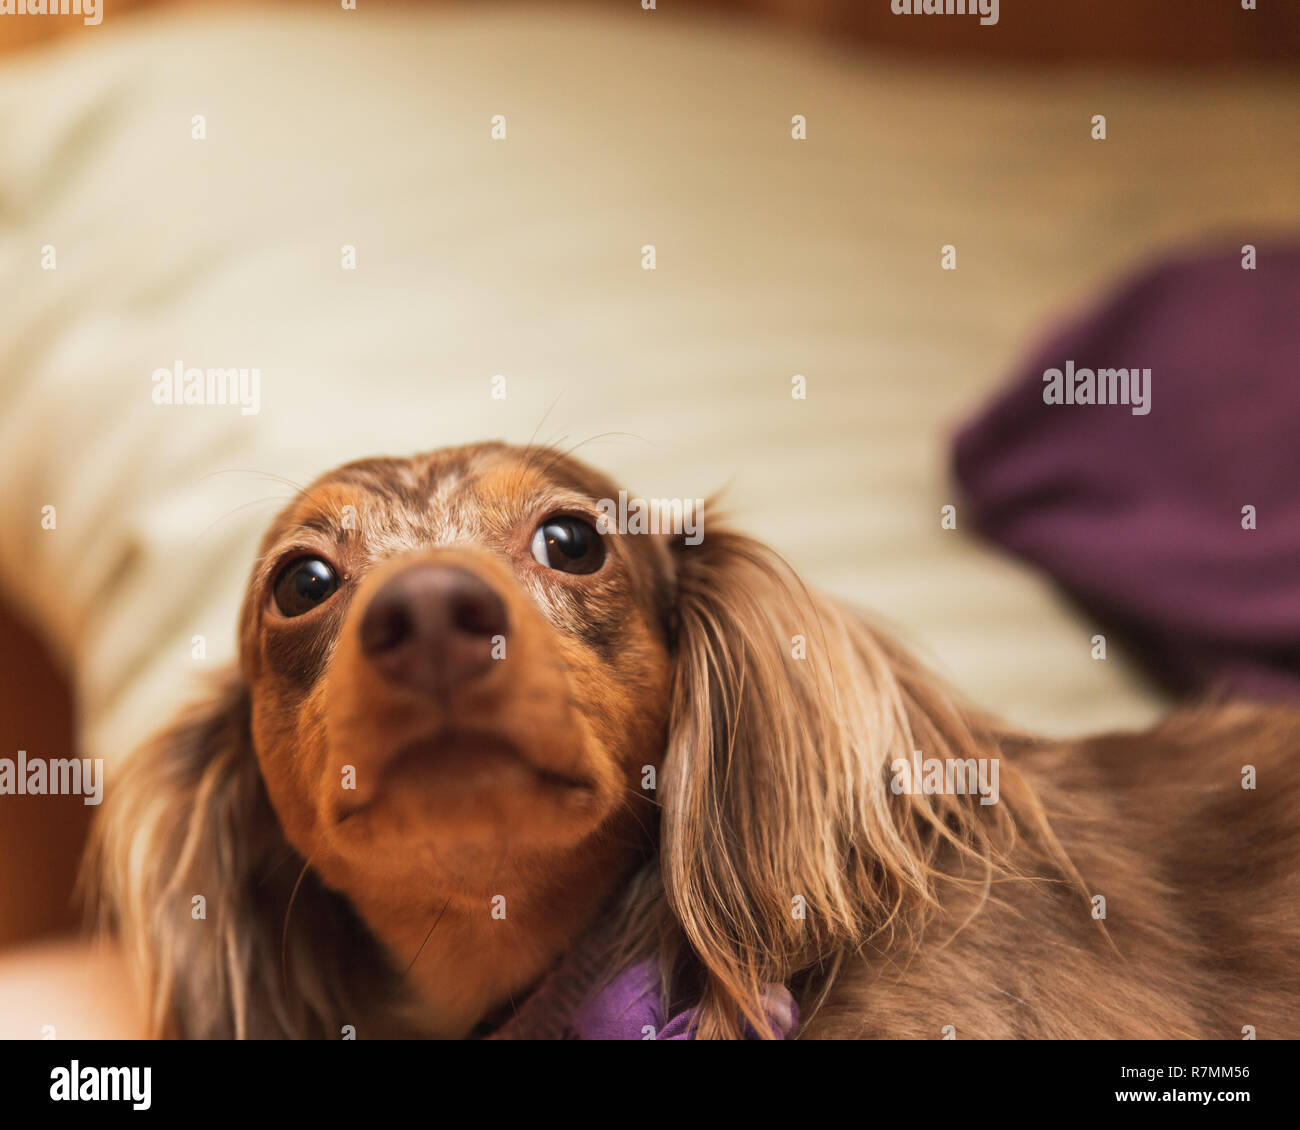 Longhaired dapple dachshund with brown and white fur laying on a bed. Stock Photo